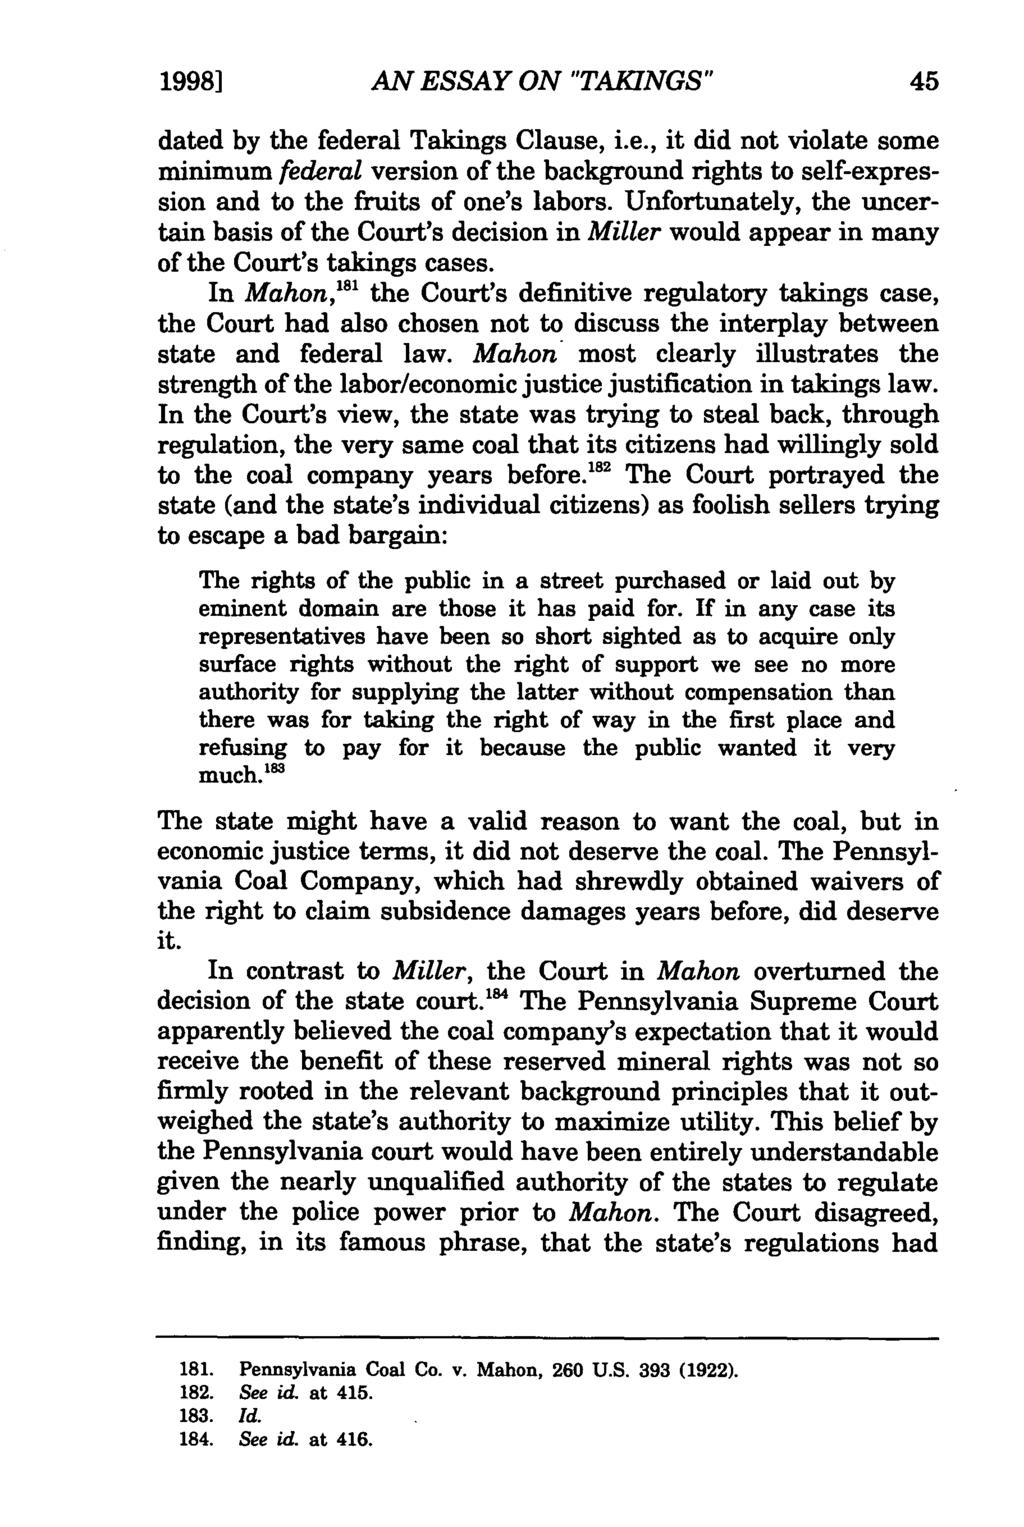 1998] Clifford and Huff: An Essay on Takings AN ESSAY ON "TAKINGS" dated by the federal Takings Clause, i.e., it did not violate some minimum federal version of the background rights to self-expression and to the fruits of one's labors.